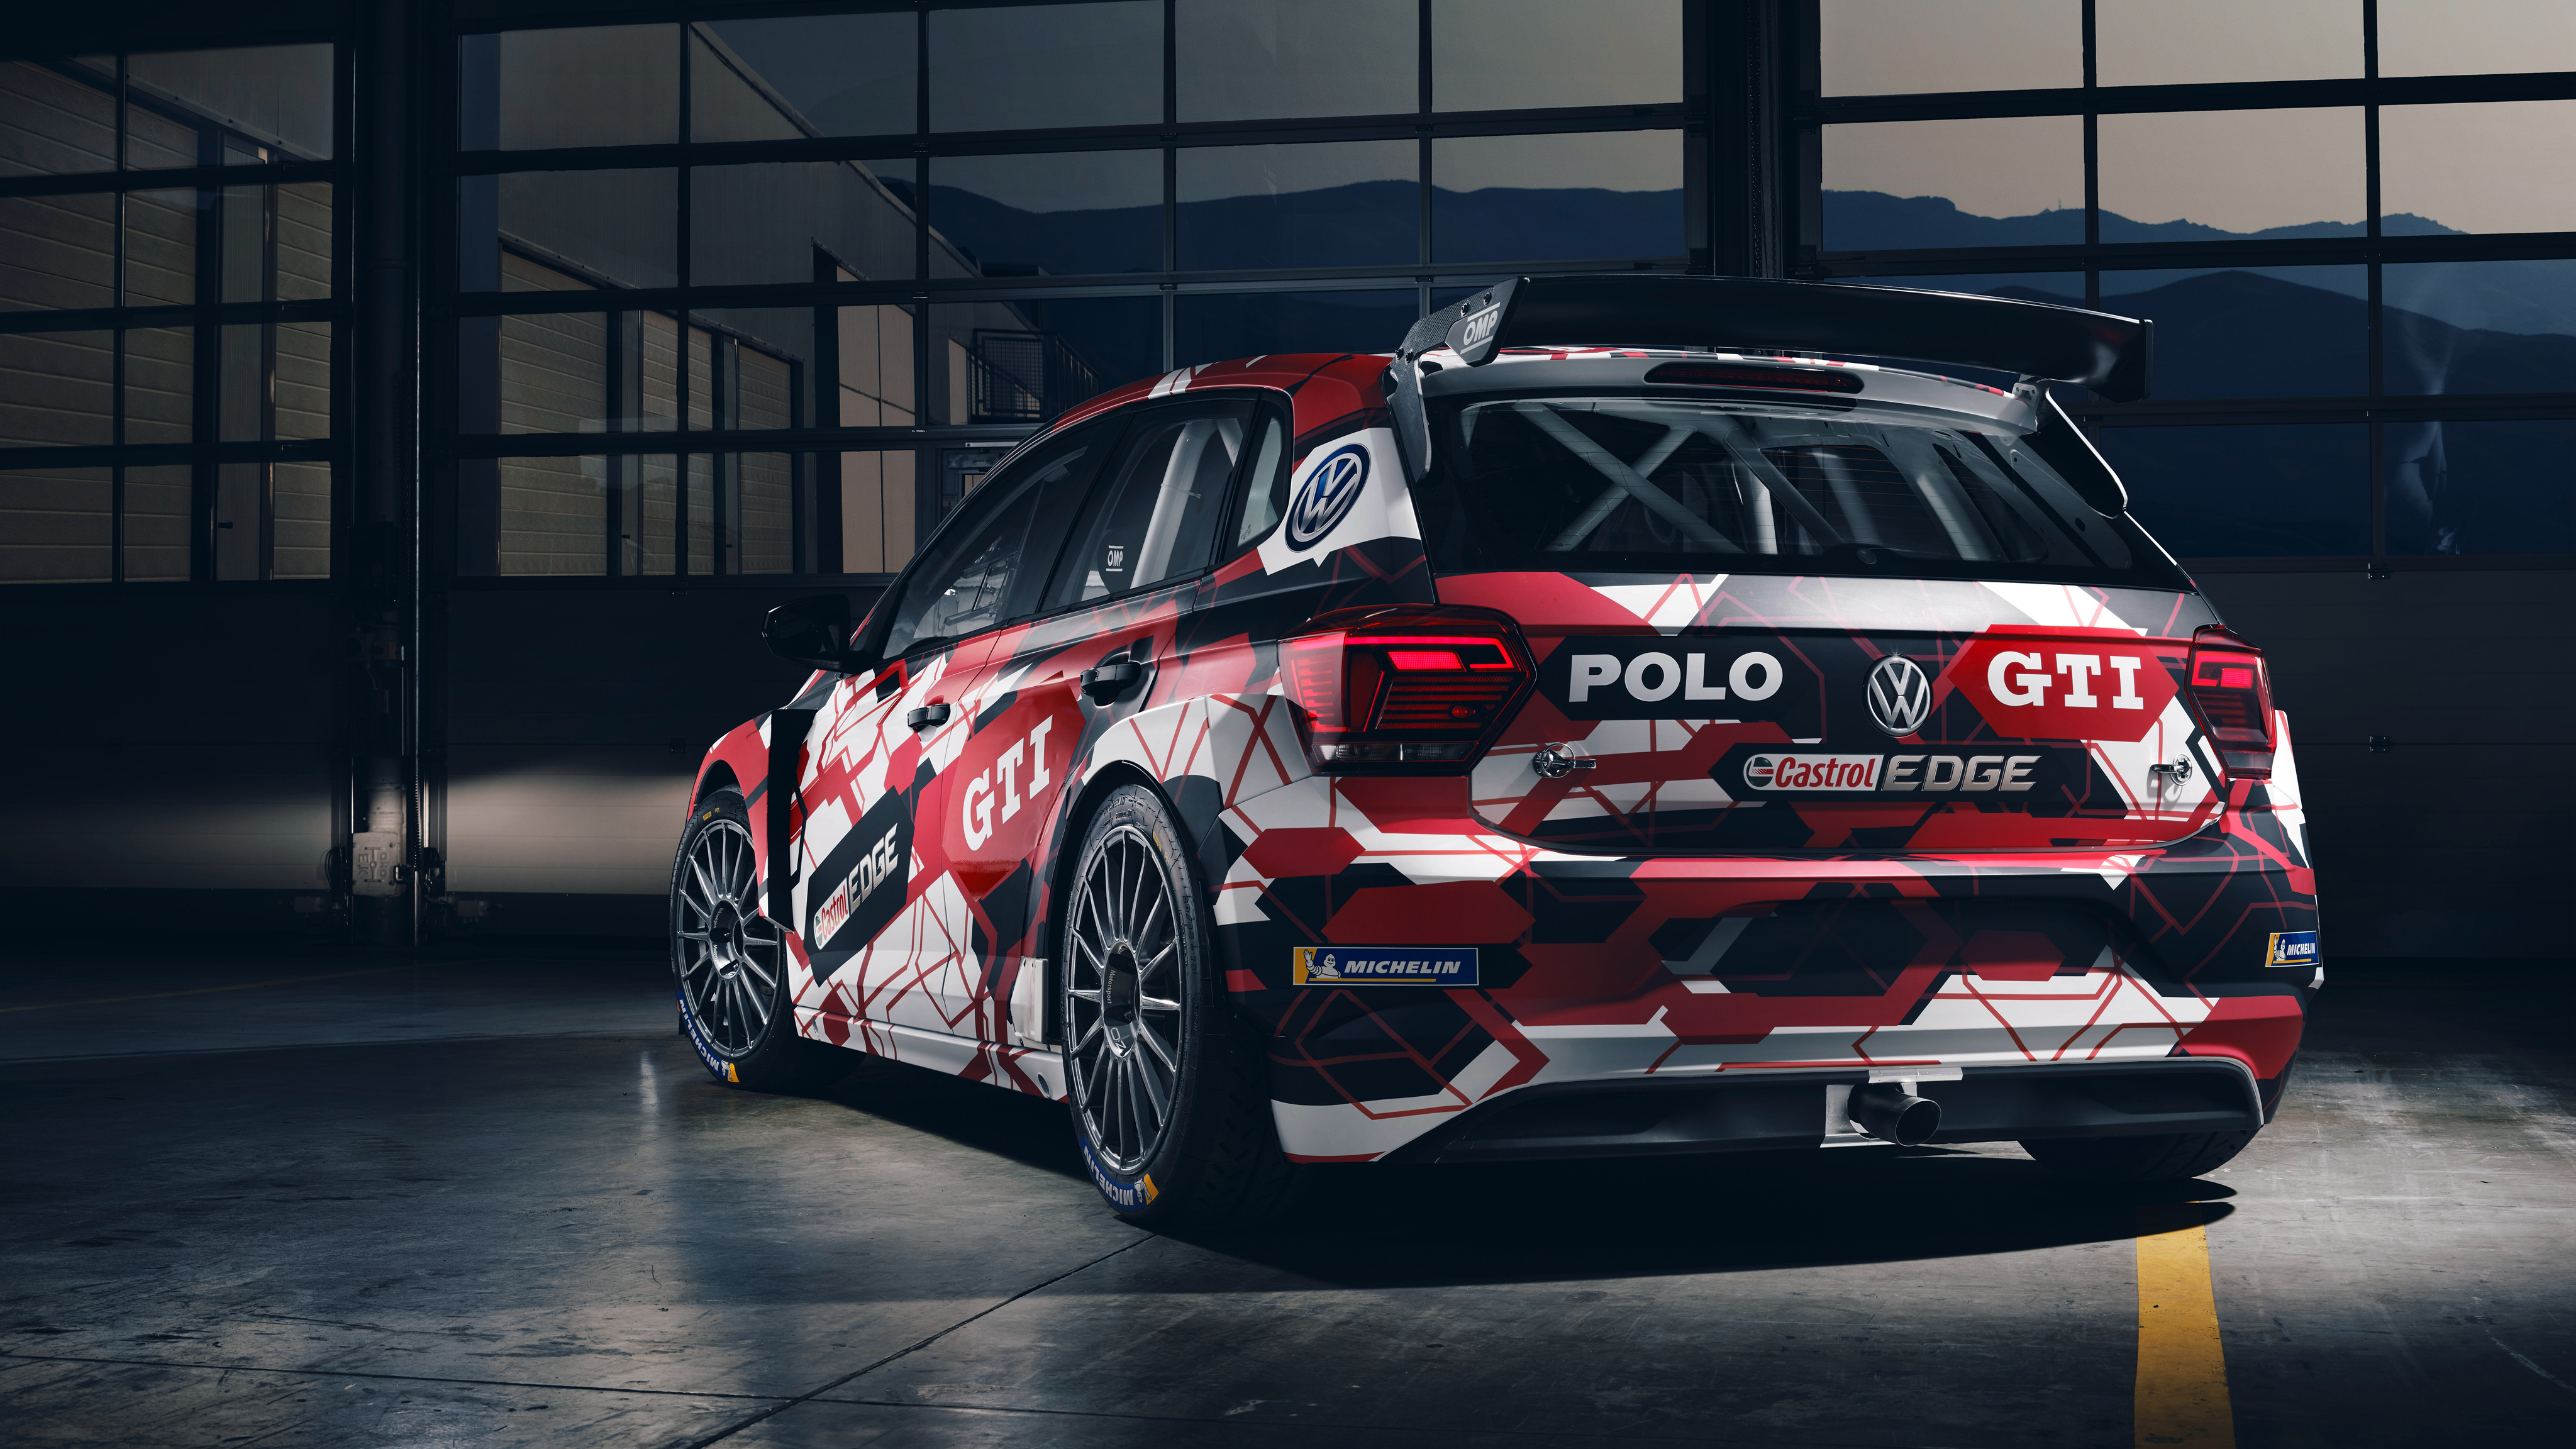 X Vw Polo Gti R K Hd K Wallpapers Images Backgrounds | Hot Sex Picture